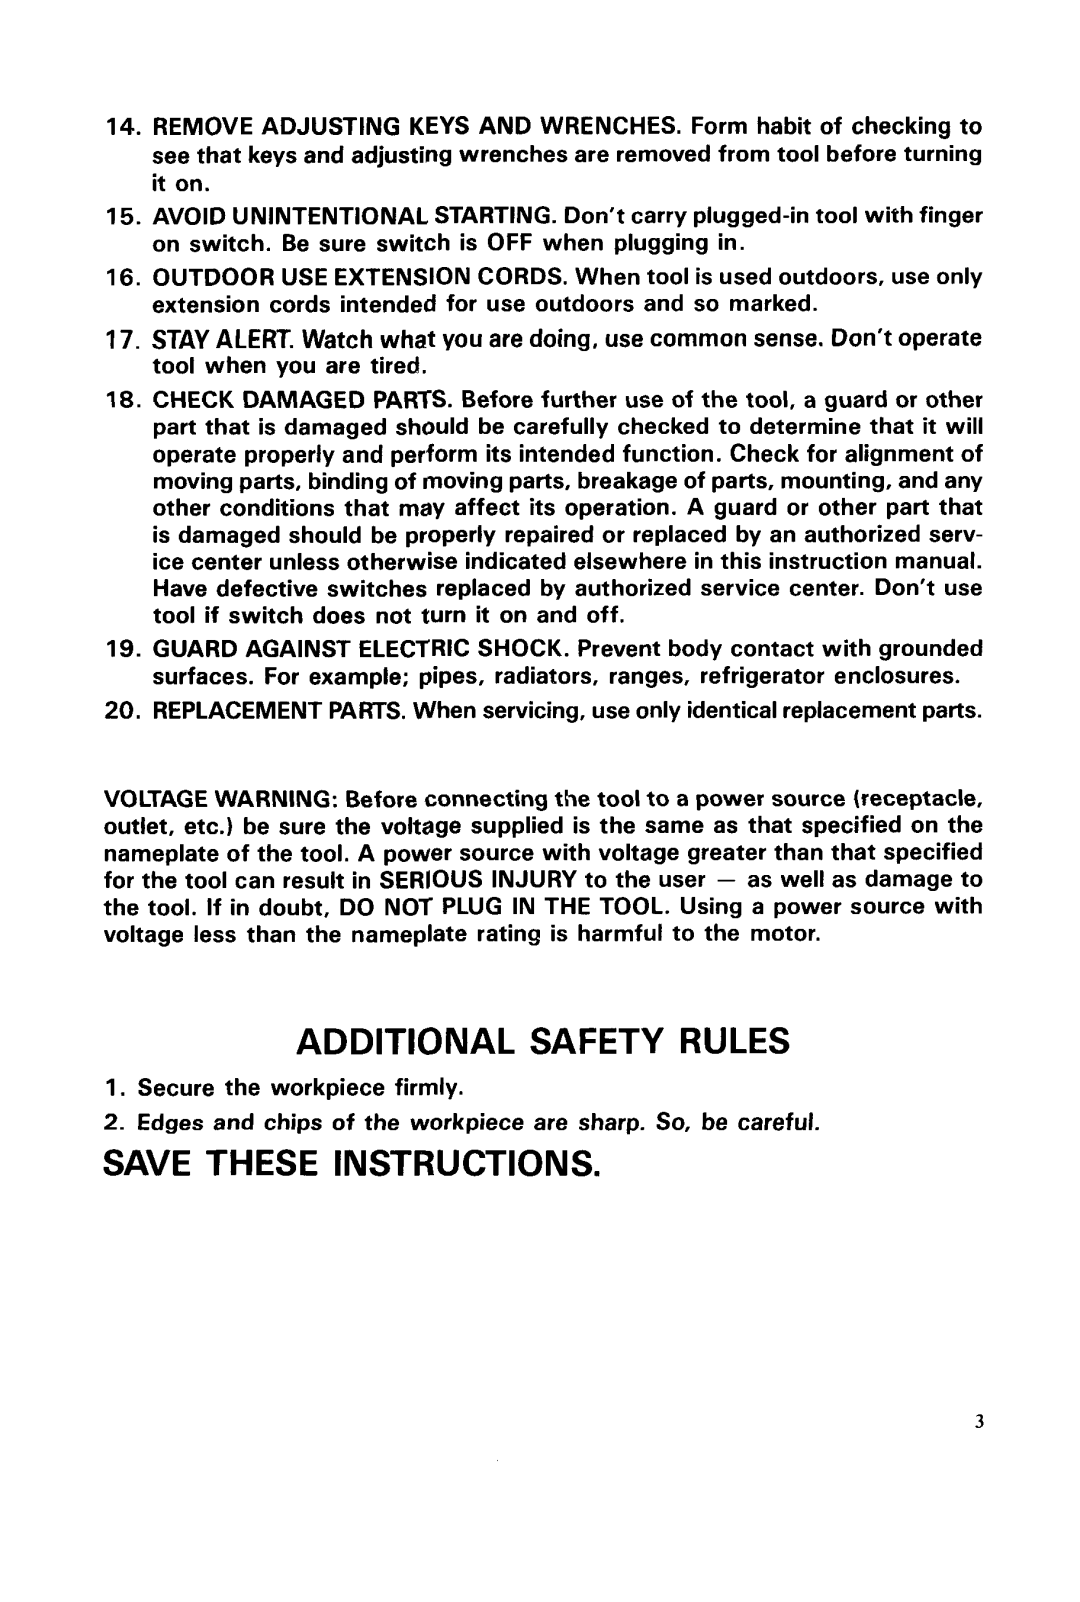 Makita JS1660 instruction manual Additional Safety Rules, Save These Instructions 